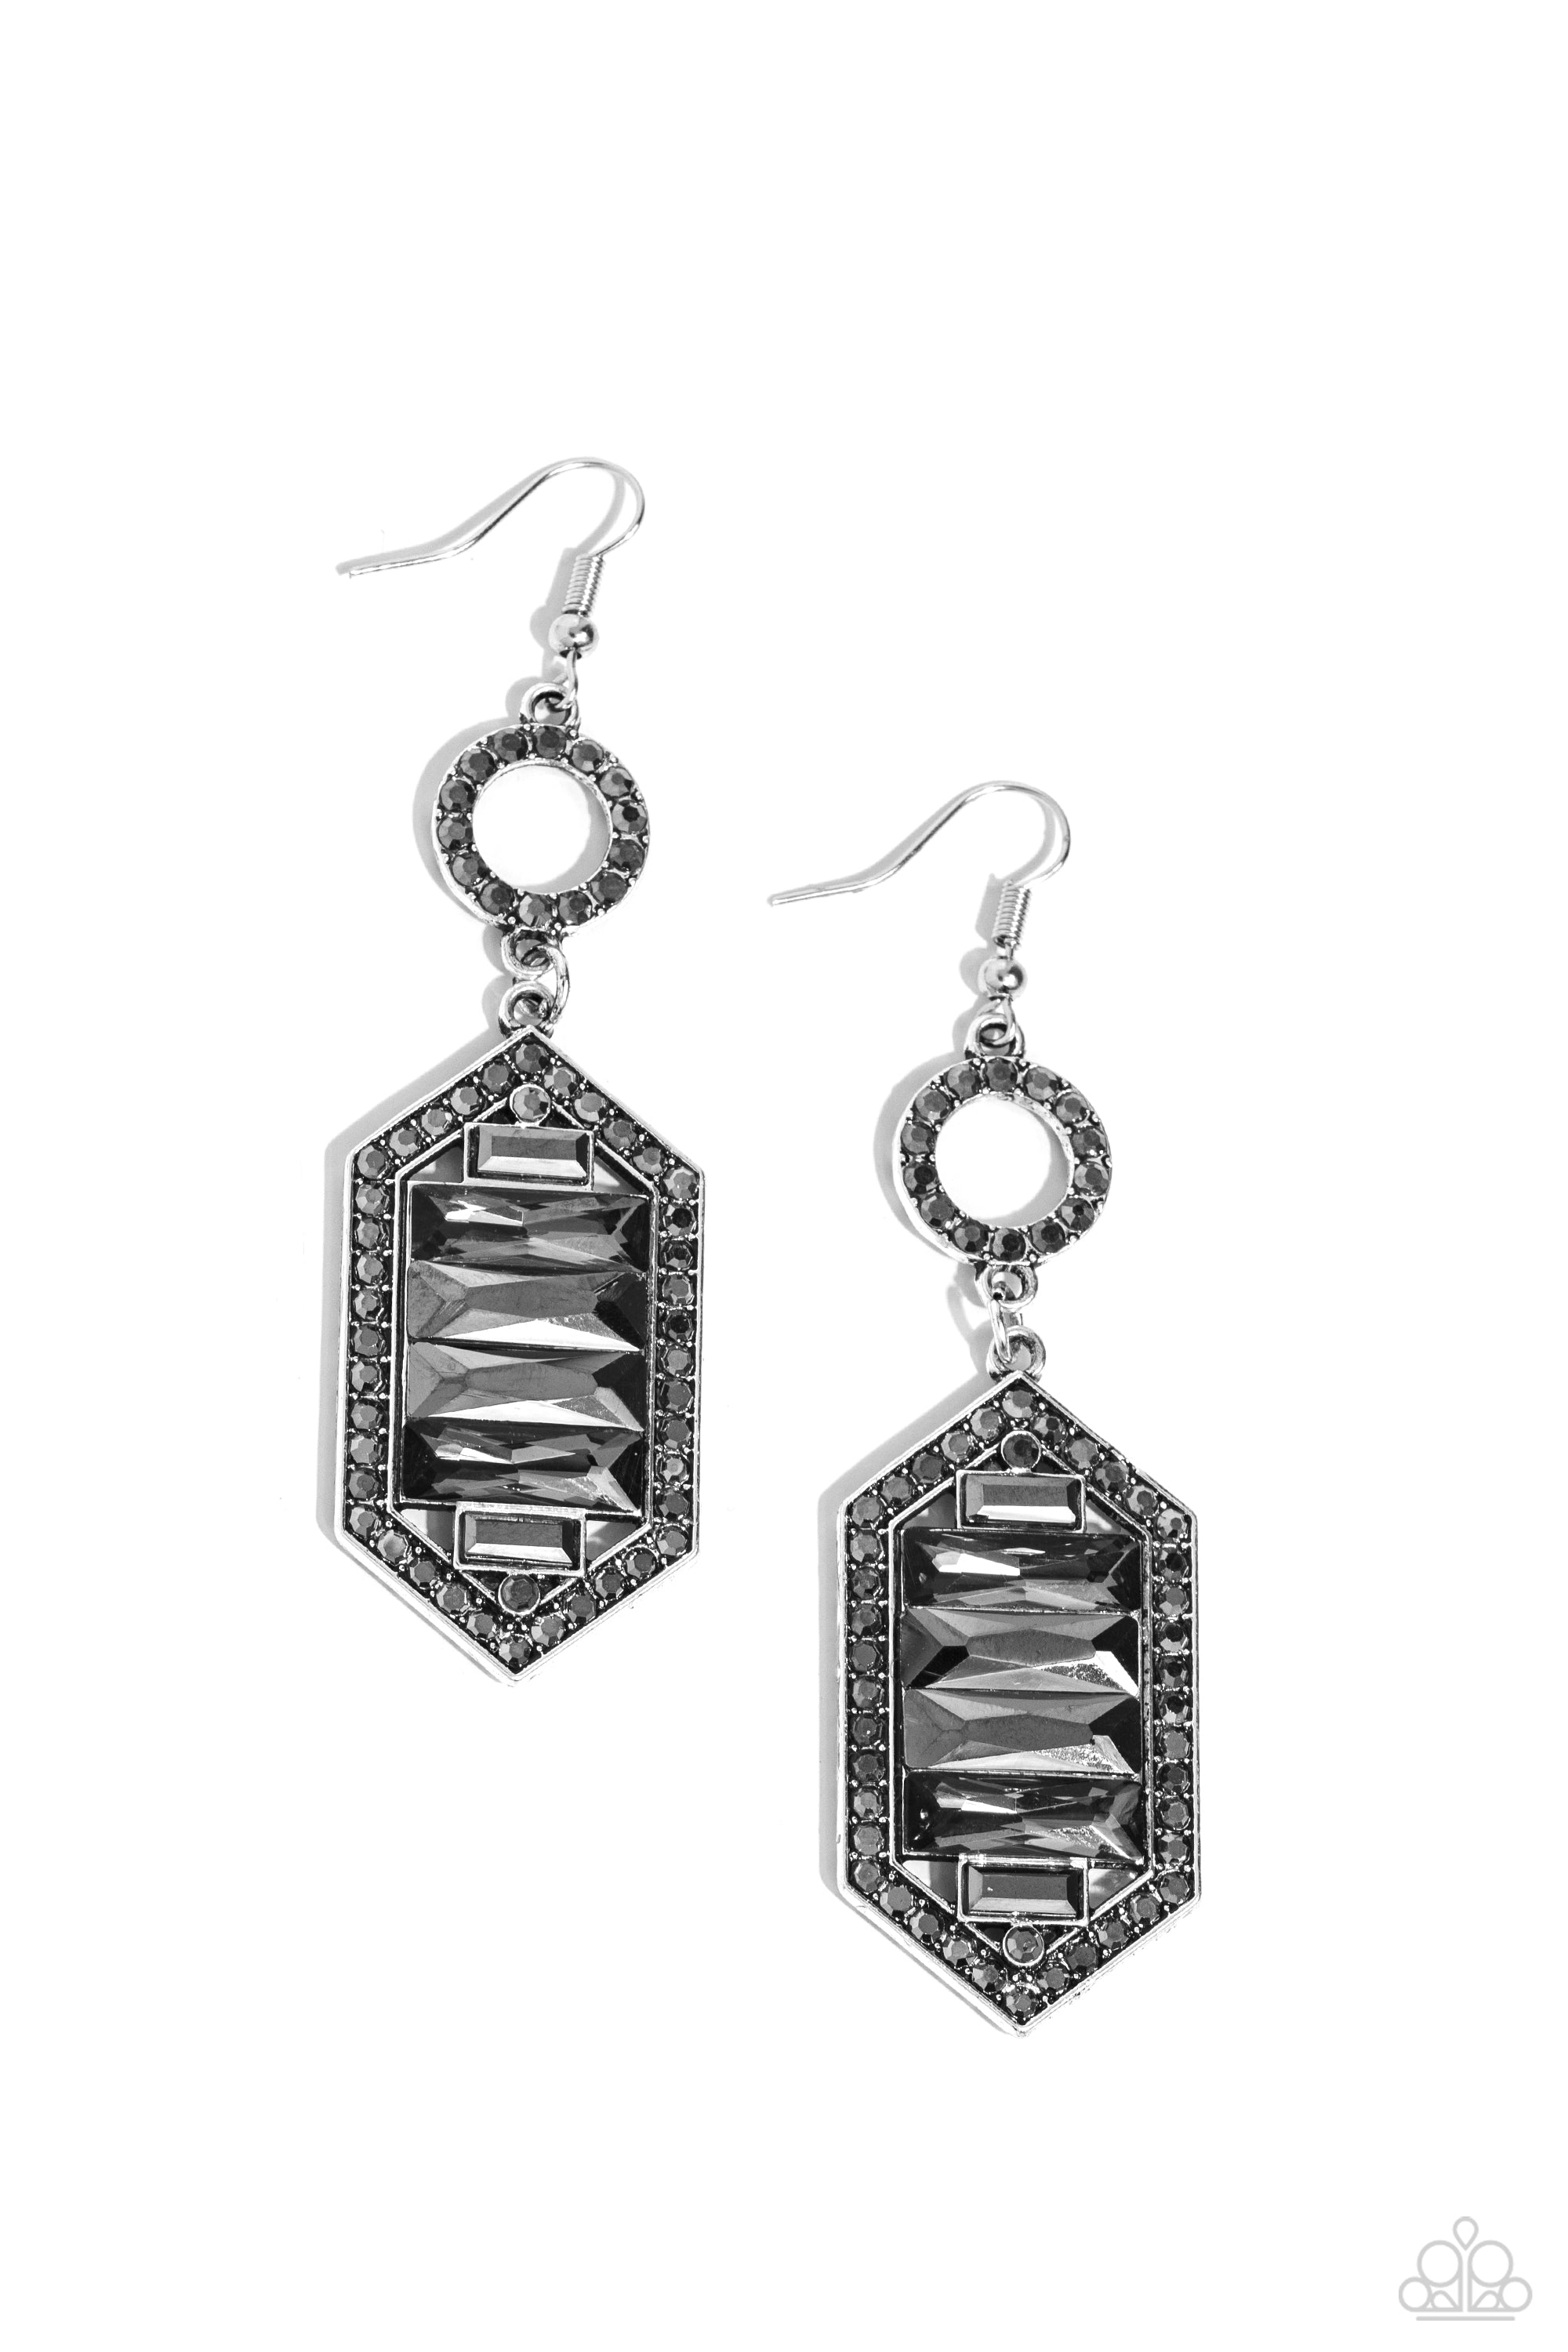 COMBUSTIBLE CRAVING SILVER-EARRINGS